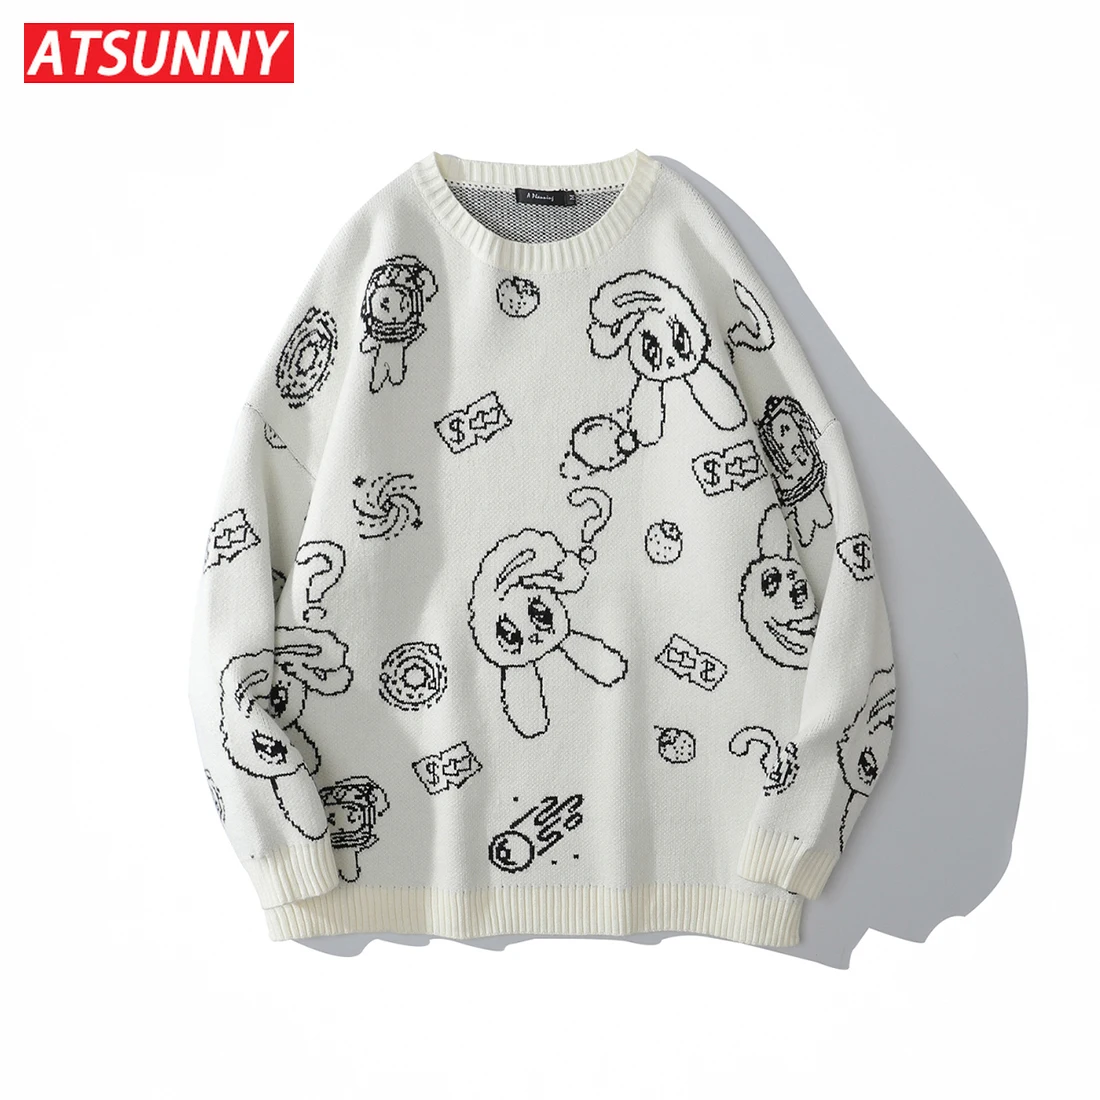 ATSUNNY Rabbit Knitted Cute Cartoon Sweater Fashion Couple Thicken Oversize Sweater Harajuku Style Man Autumn and Winter Clothes